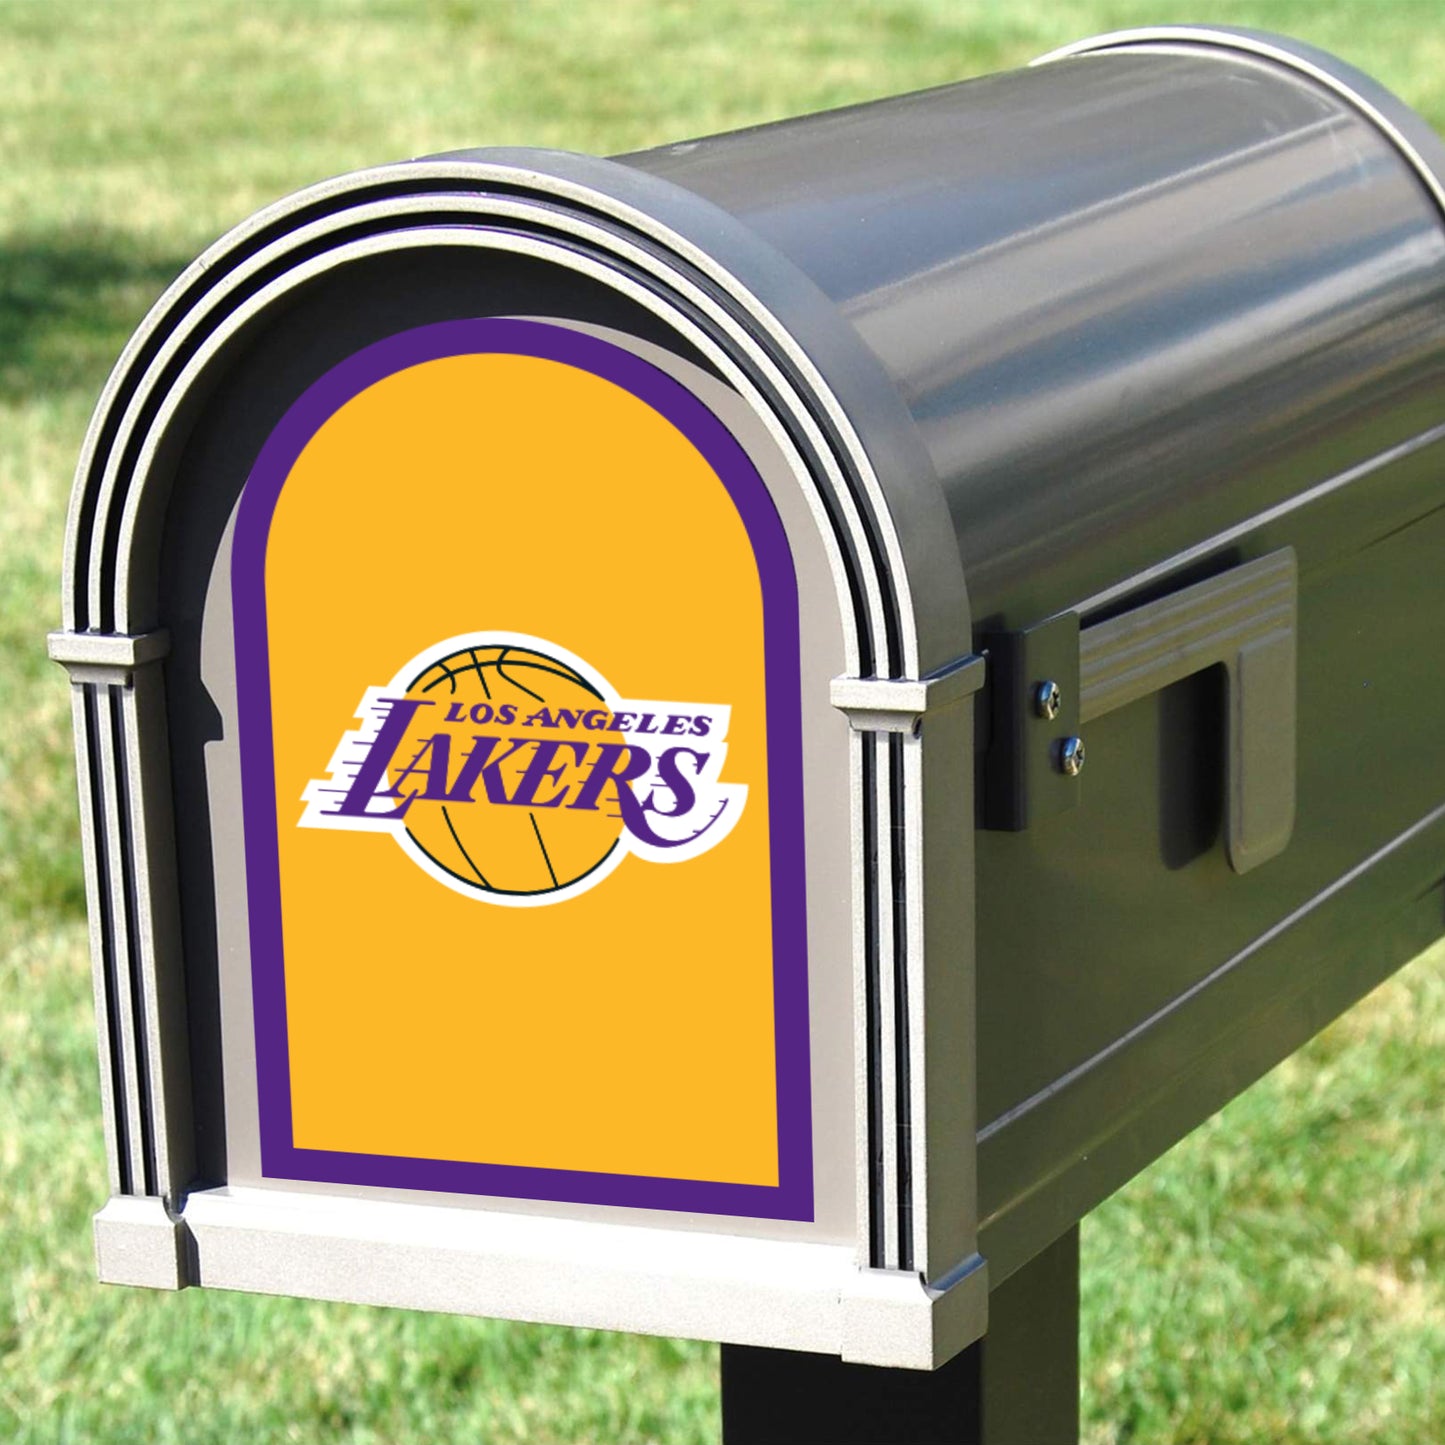 Los Angeles Lakers: Mailbox Logo - Officially Licensed NBA Outdoor Graphic